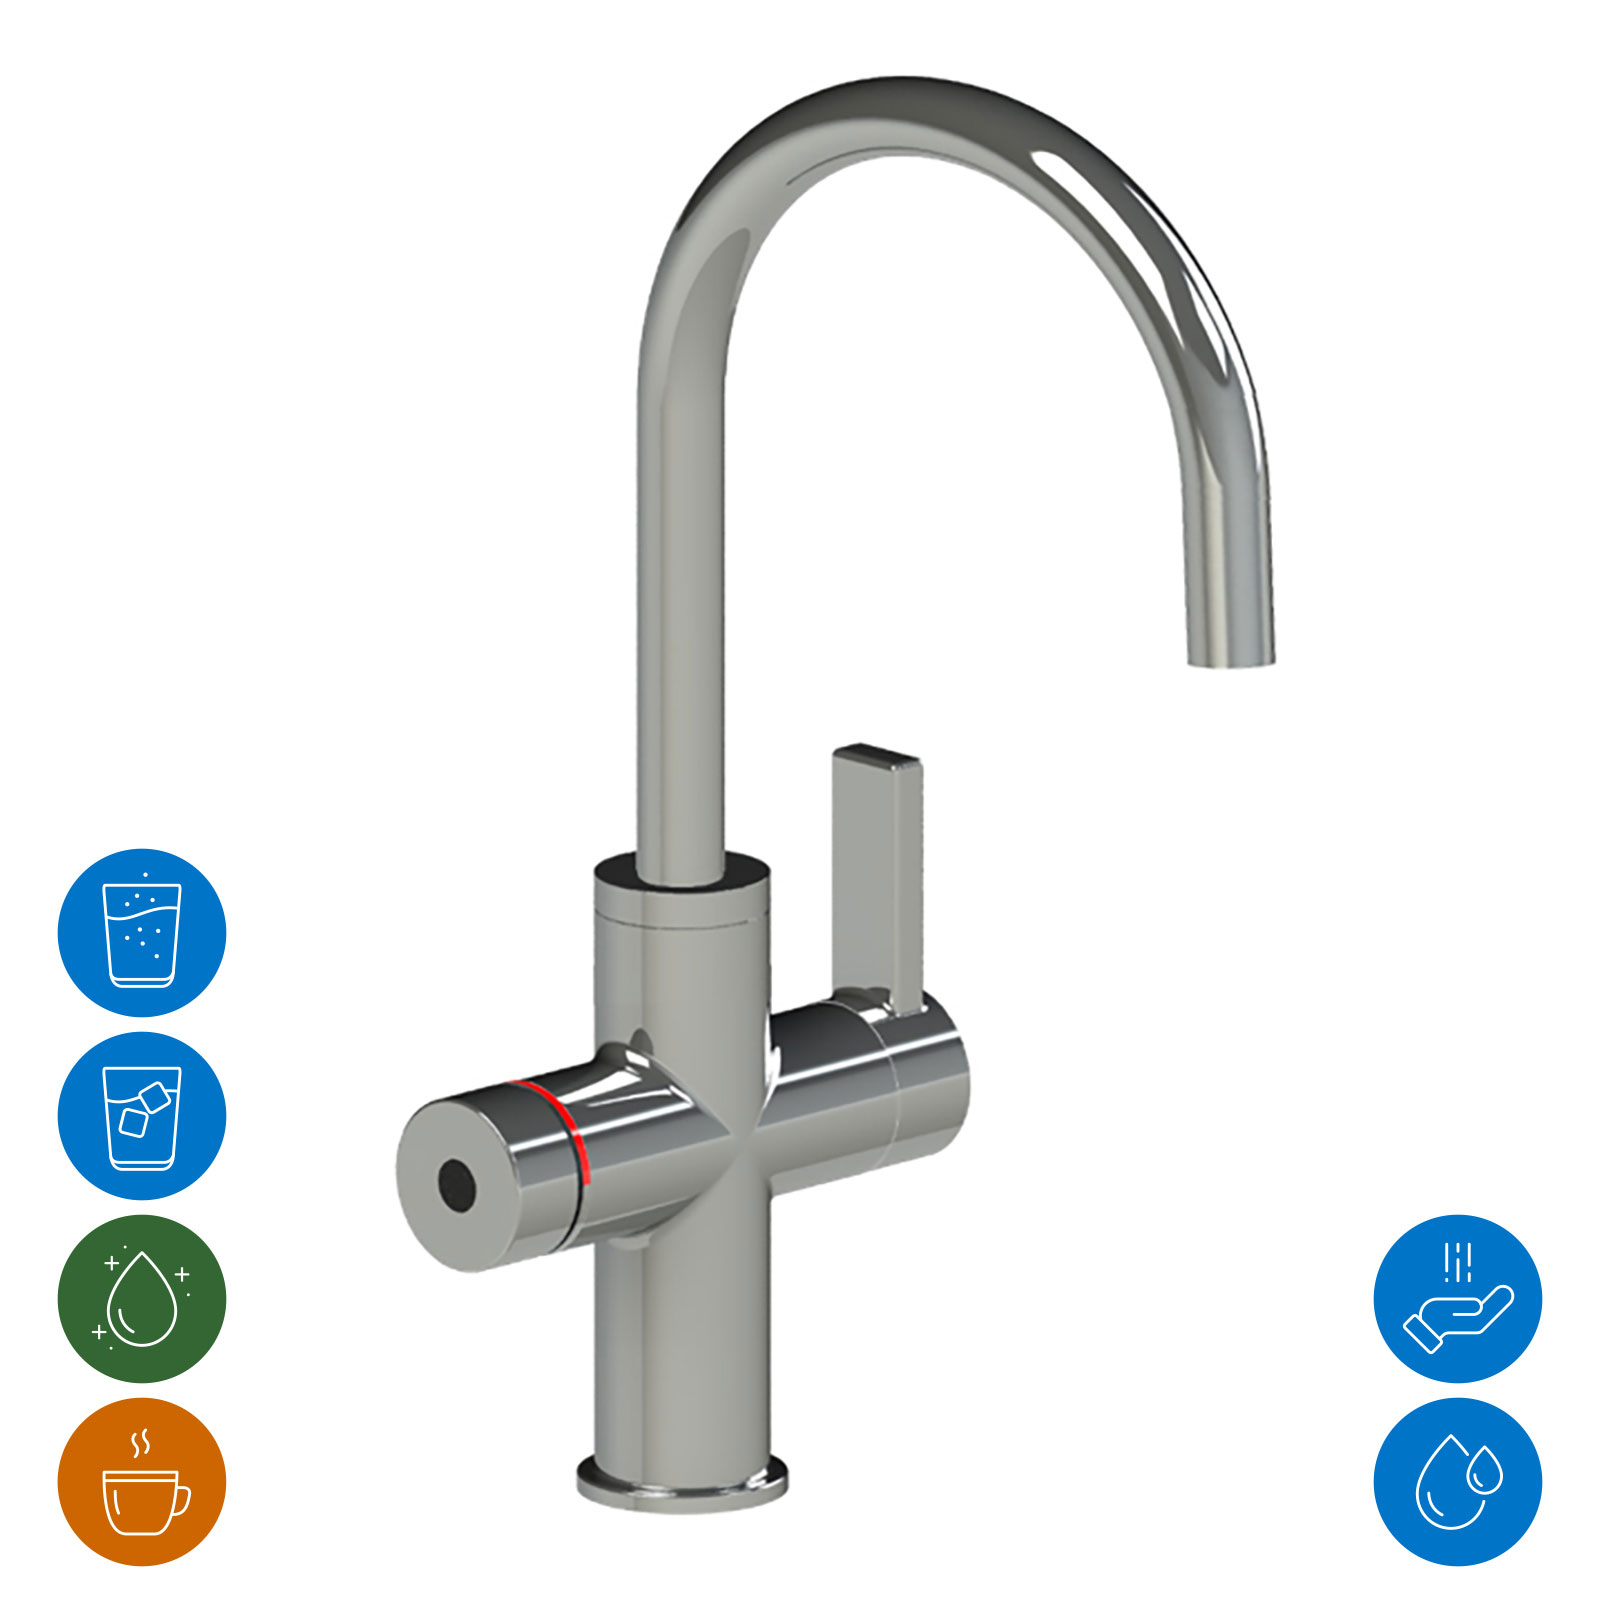 Multifunctional faucet with electronic push/turn knob for controlling the conditioned water undersink unit and hybrid function